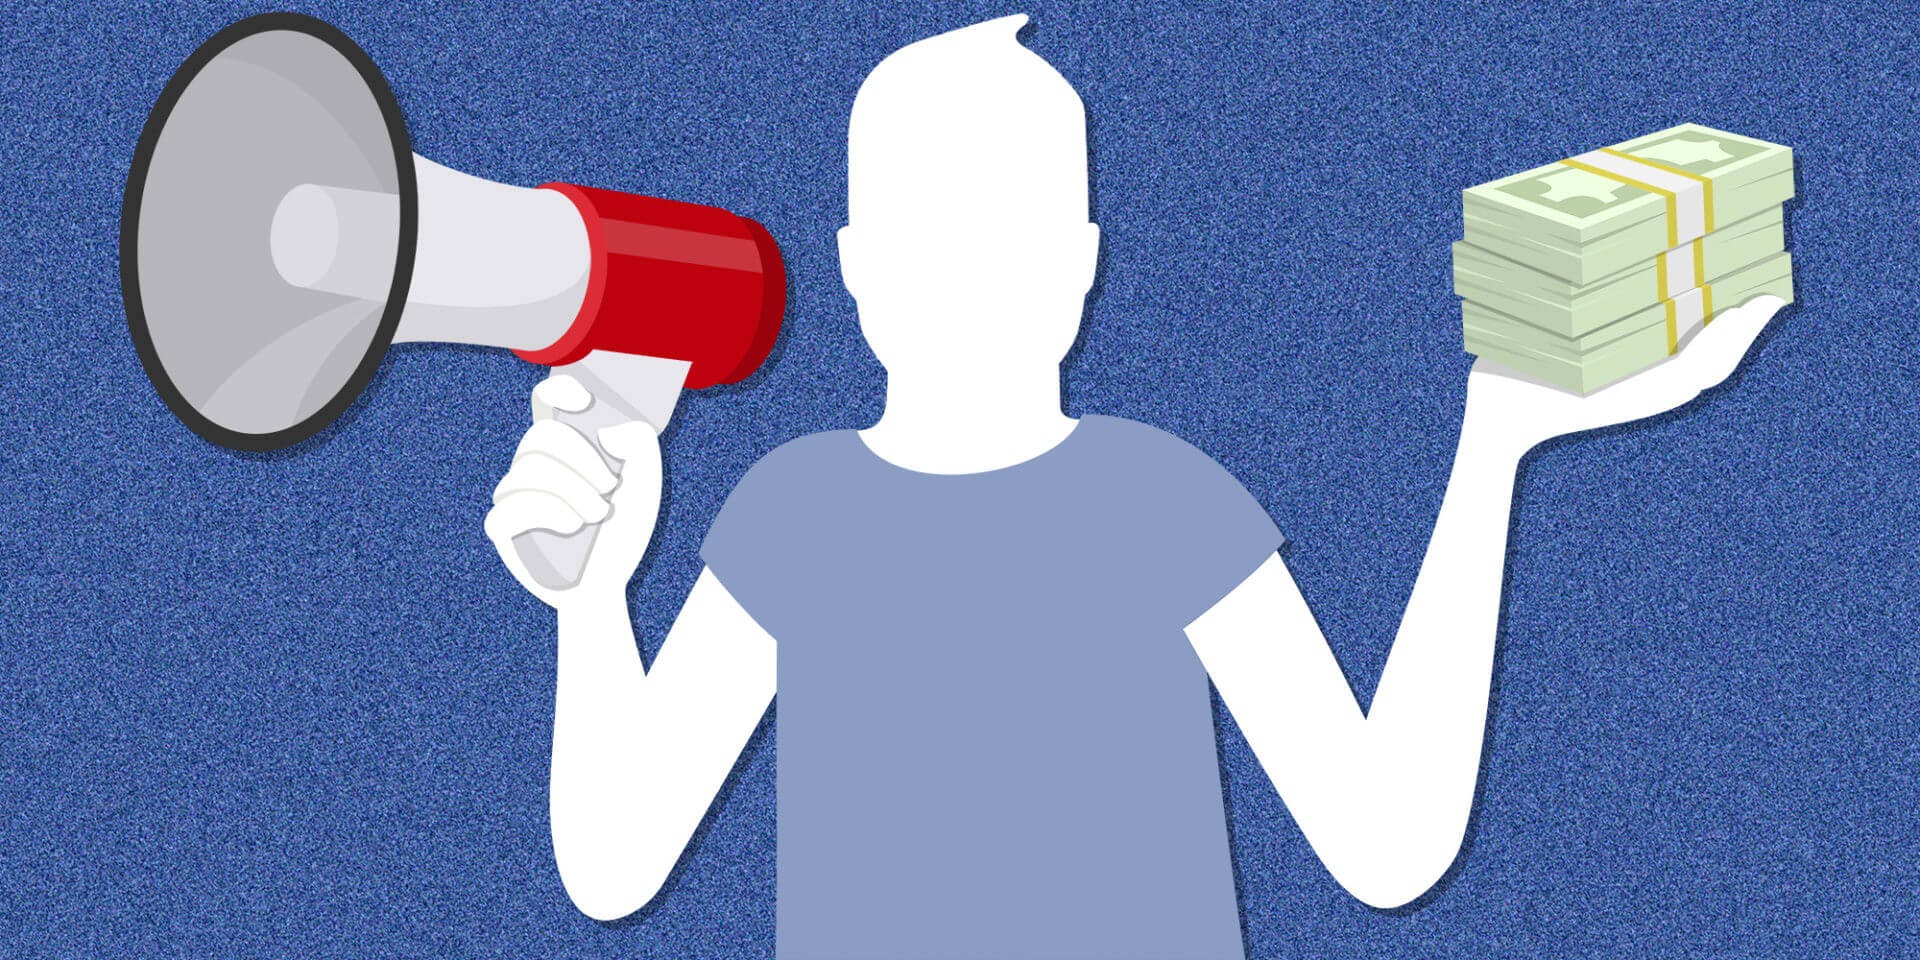 facebook icon holding bundles of cash and a megaphone